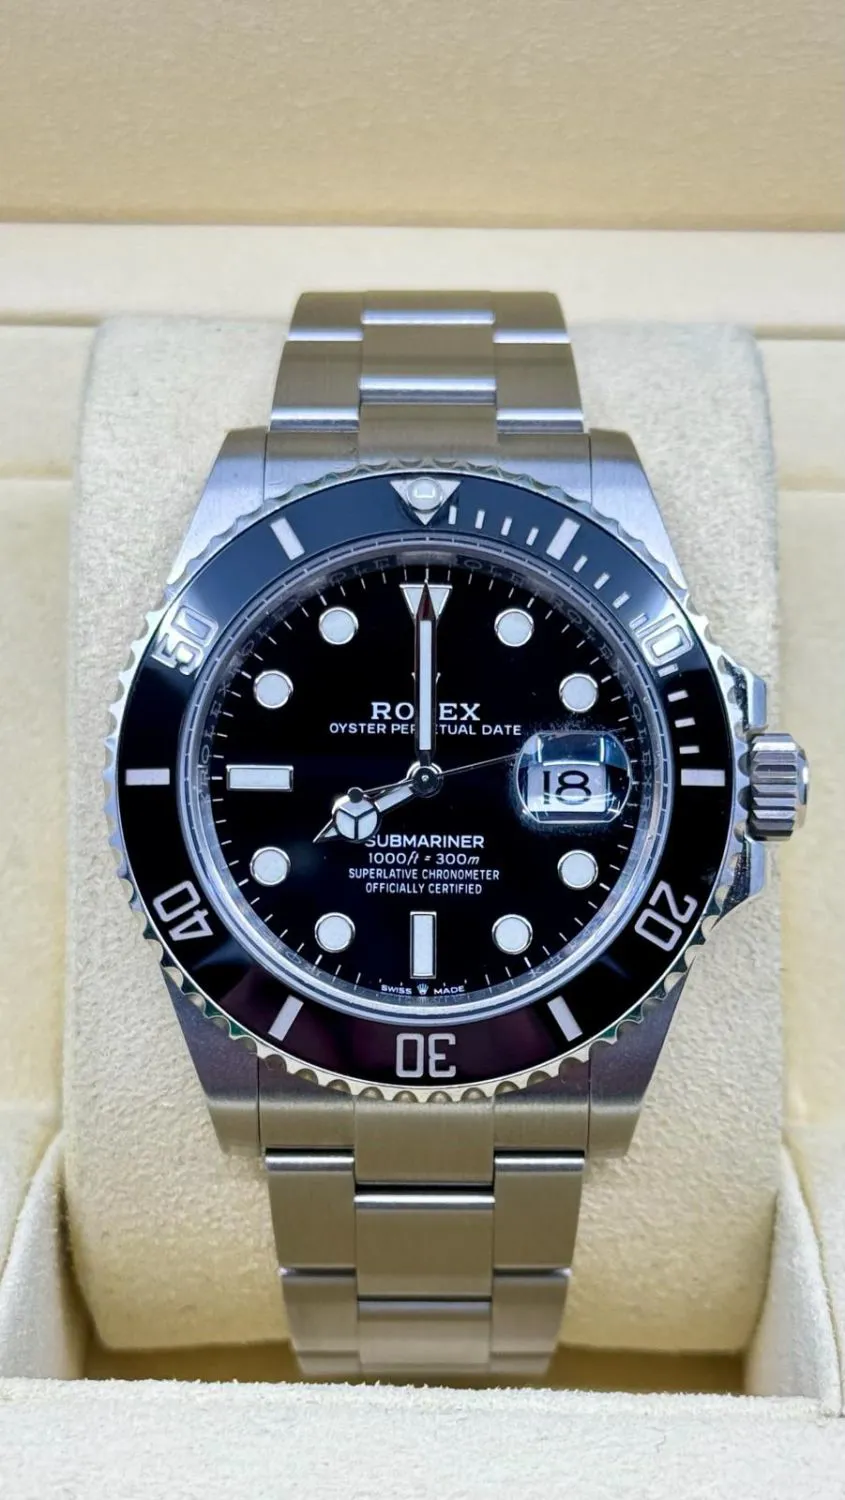 Rolex Submariner 126610LN 40mm Stainless steel and ceramic